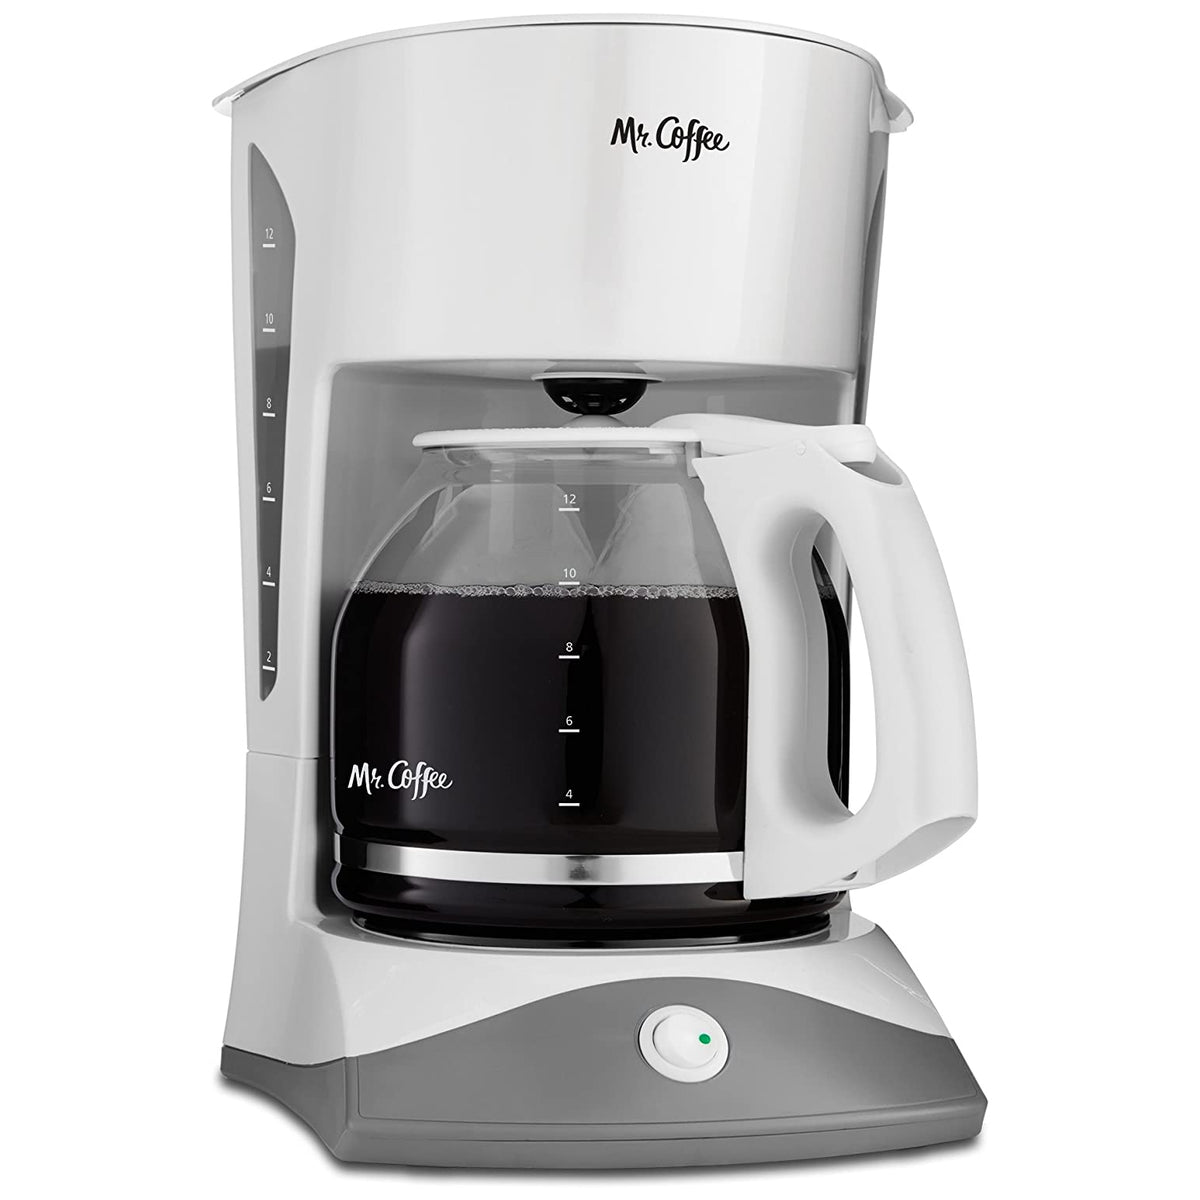 Mr. Coffee SK12-RB Classic Coffeemaker, 12-Cup, White